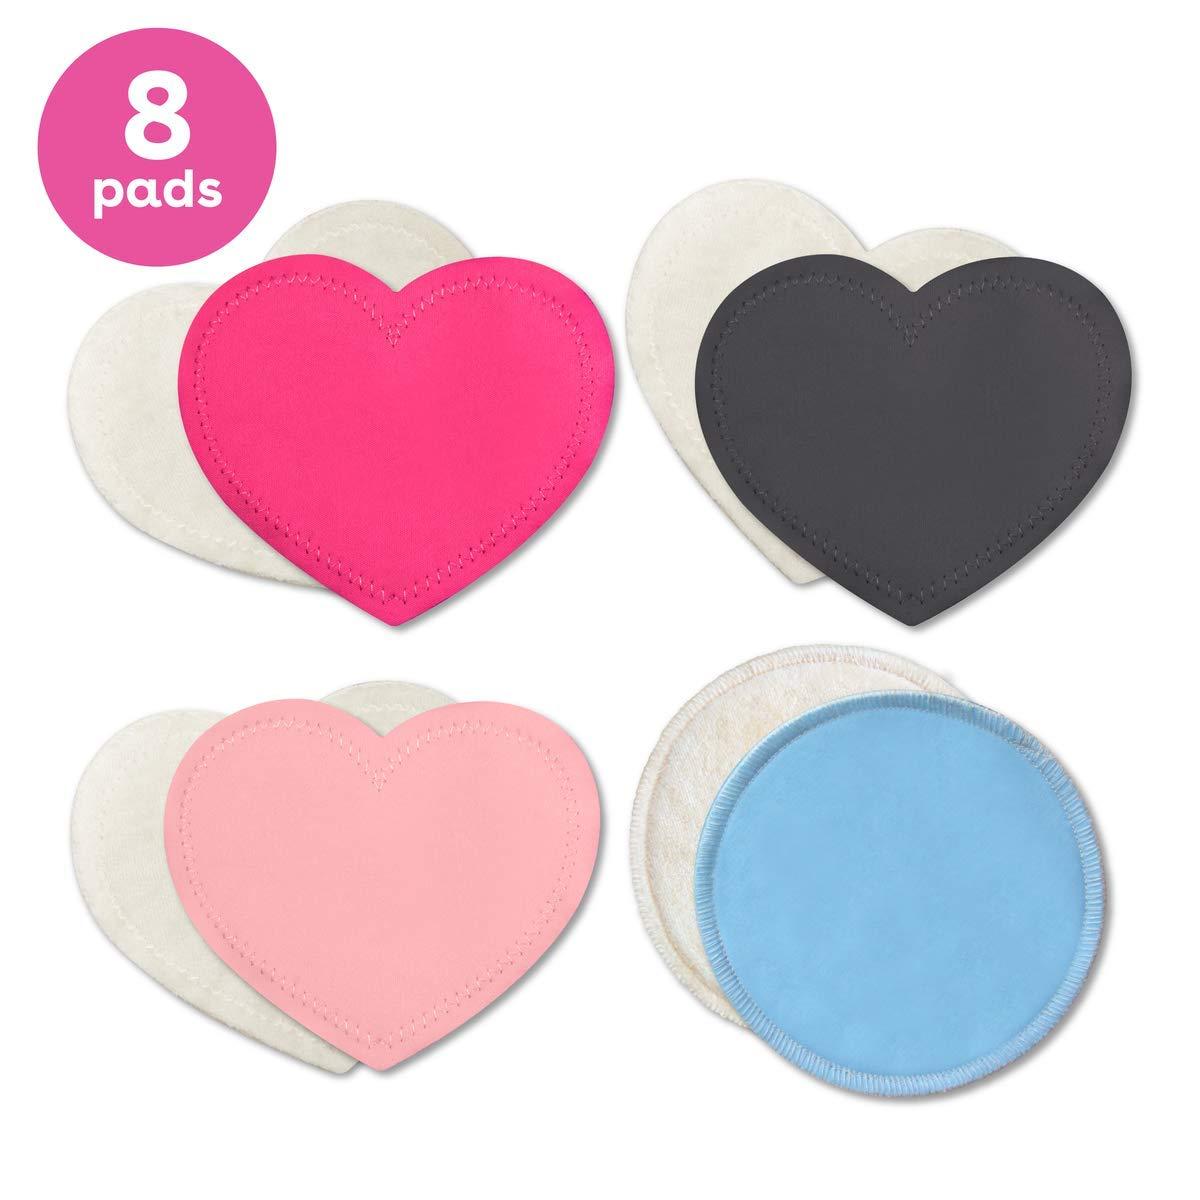 Bamboobies Womens Nursing Pads, Reusable and Washable, Multi-Color, 3  Regular Pairs and 1 Overnight Pair, Leak-Proof Pads for Breastfeeding, 4  Pairs Various 8 Count (Pack of 1) Multi-Color Multi-Pack (4 Pairs)